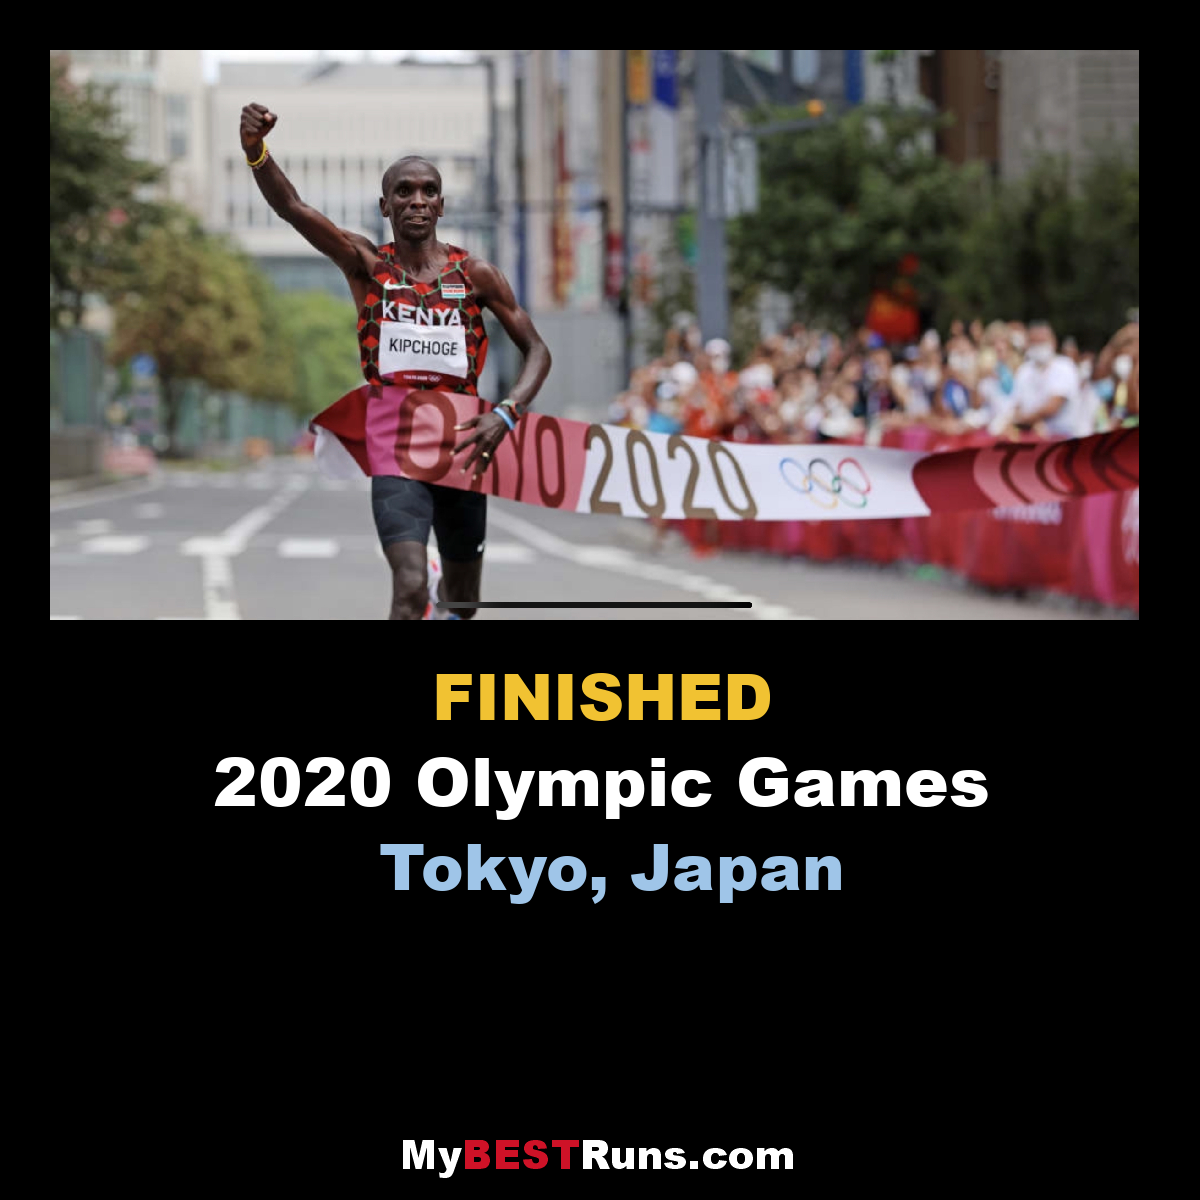 Tokyo 2020 Olympic Games